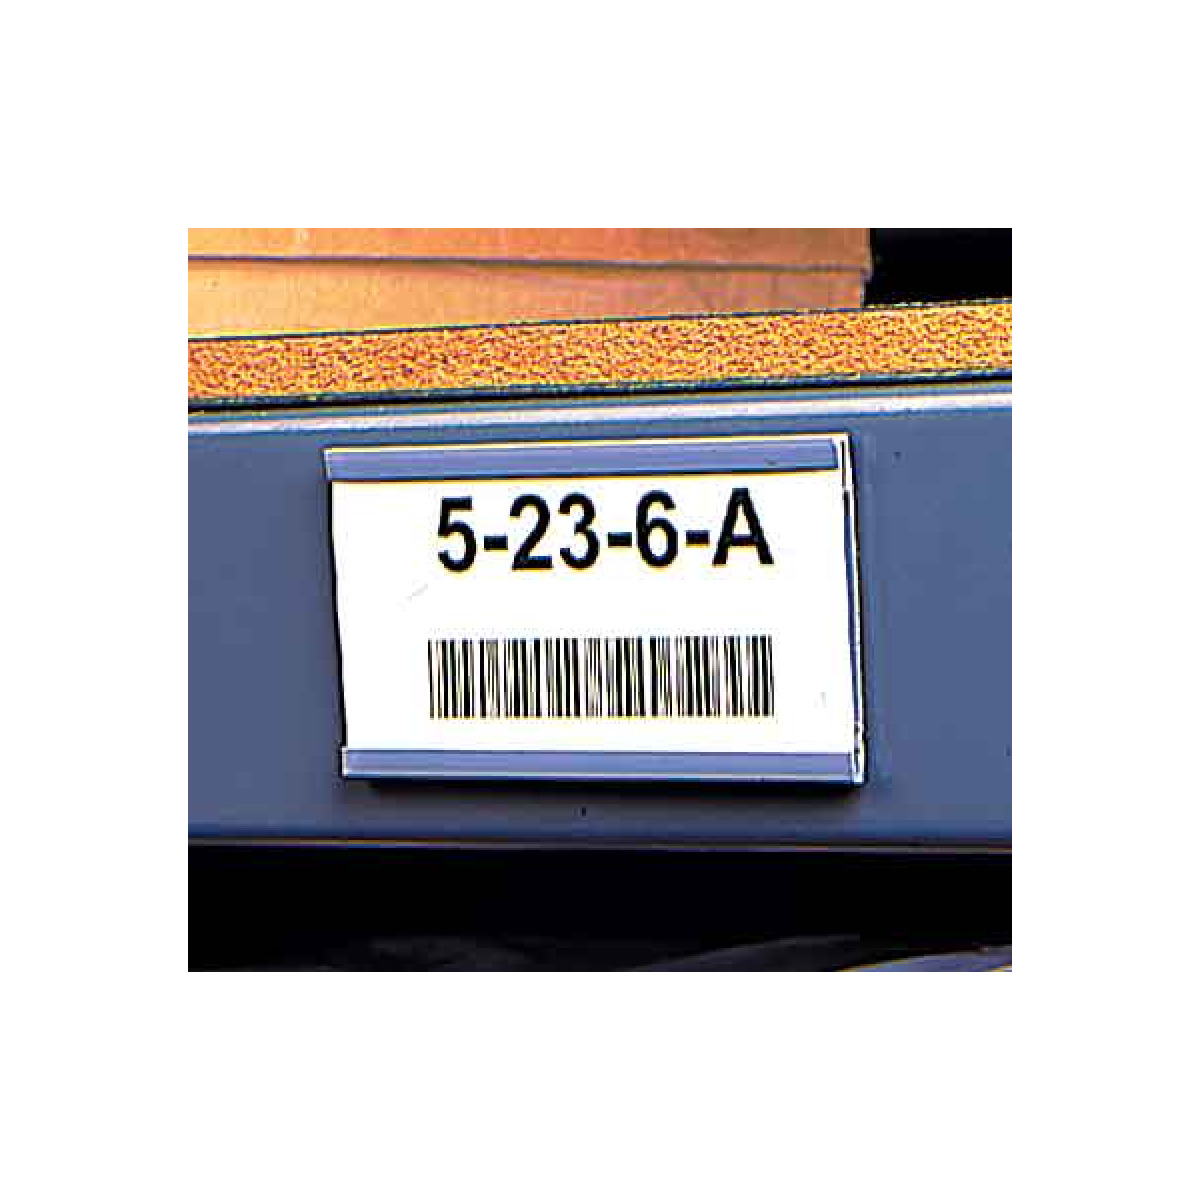 Plastic card holder with magnetic backing on warehouse shelf 